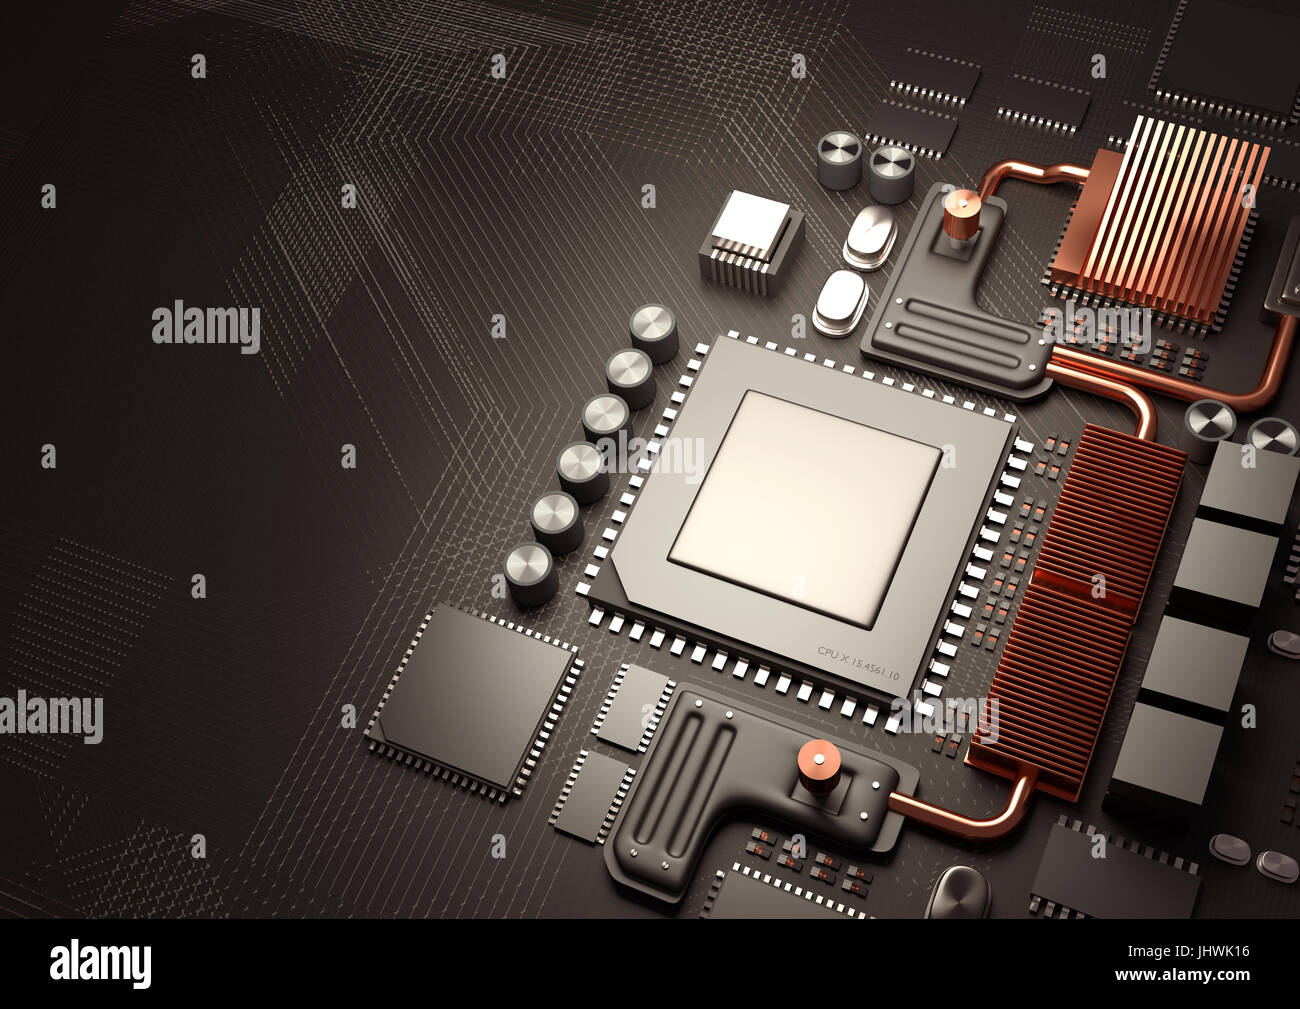 Modern Technology background.A close look at a computer CPU on a motherboard for processing data. 3D illustration render. Stock Photo